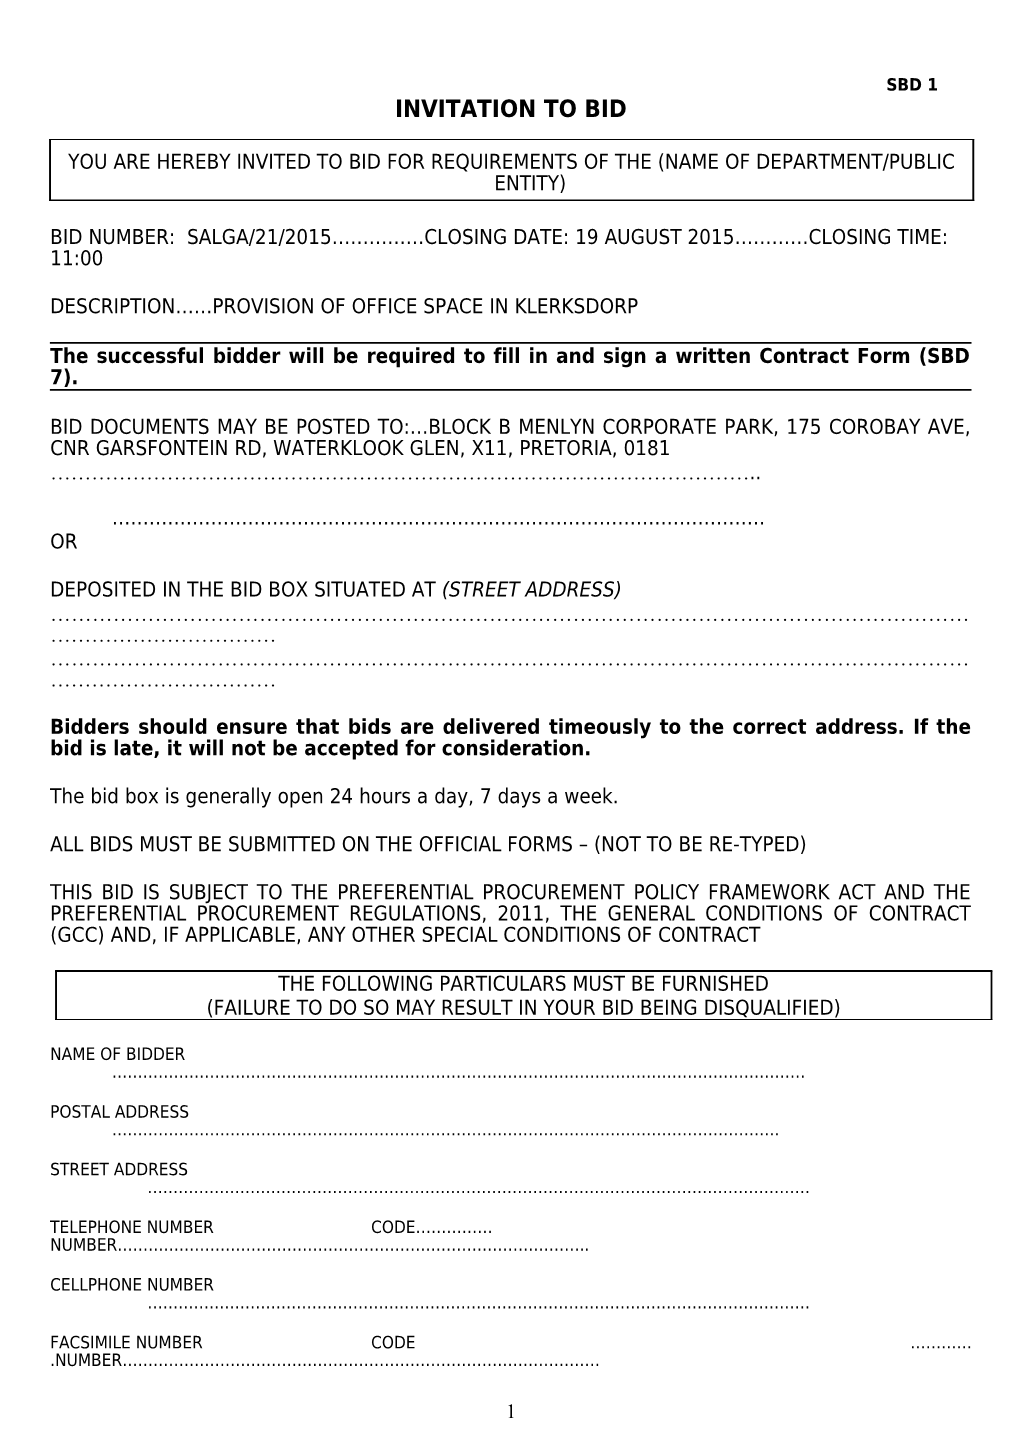 You Are Hereby Invited to Tender to the Government of the Republic of South Africa s1